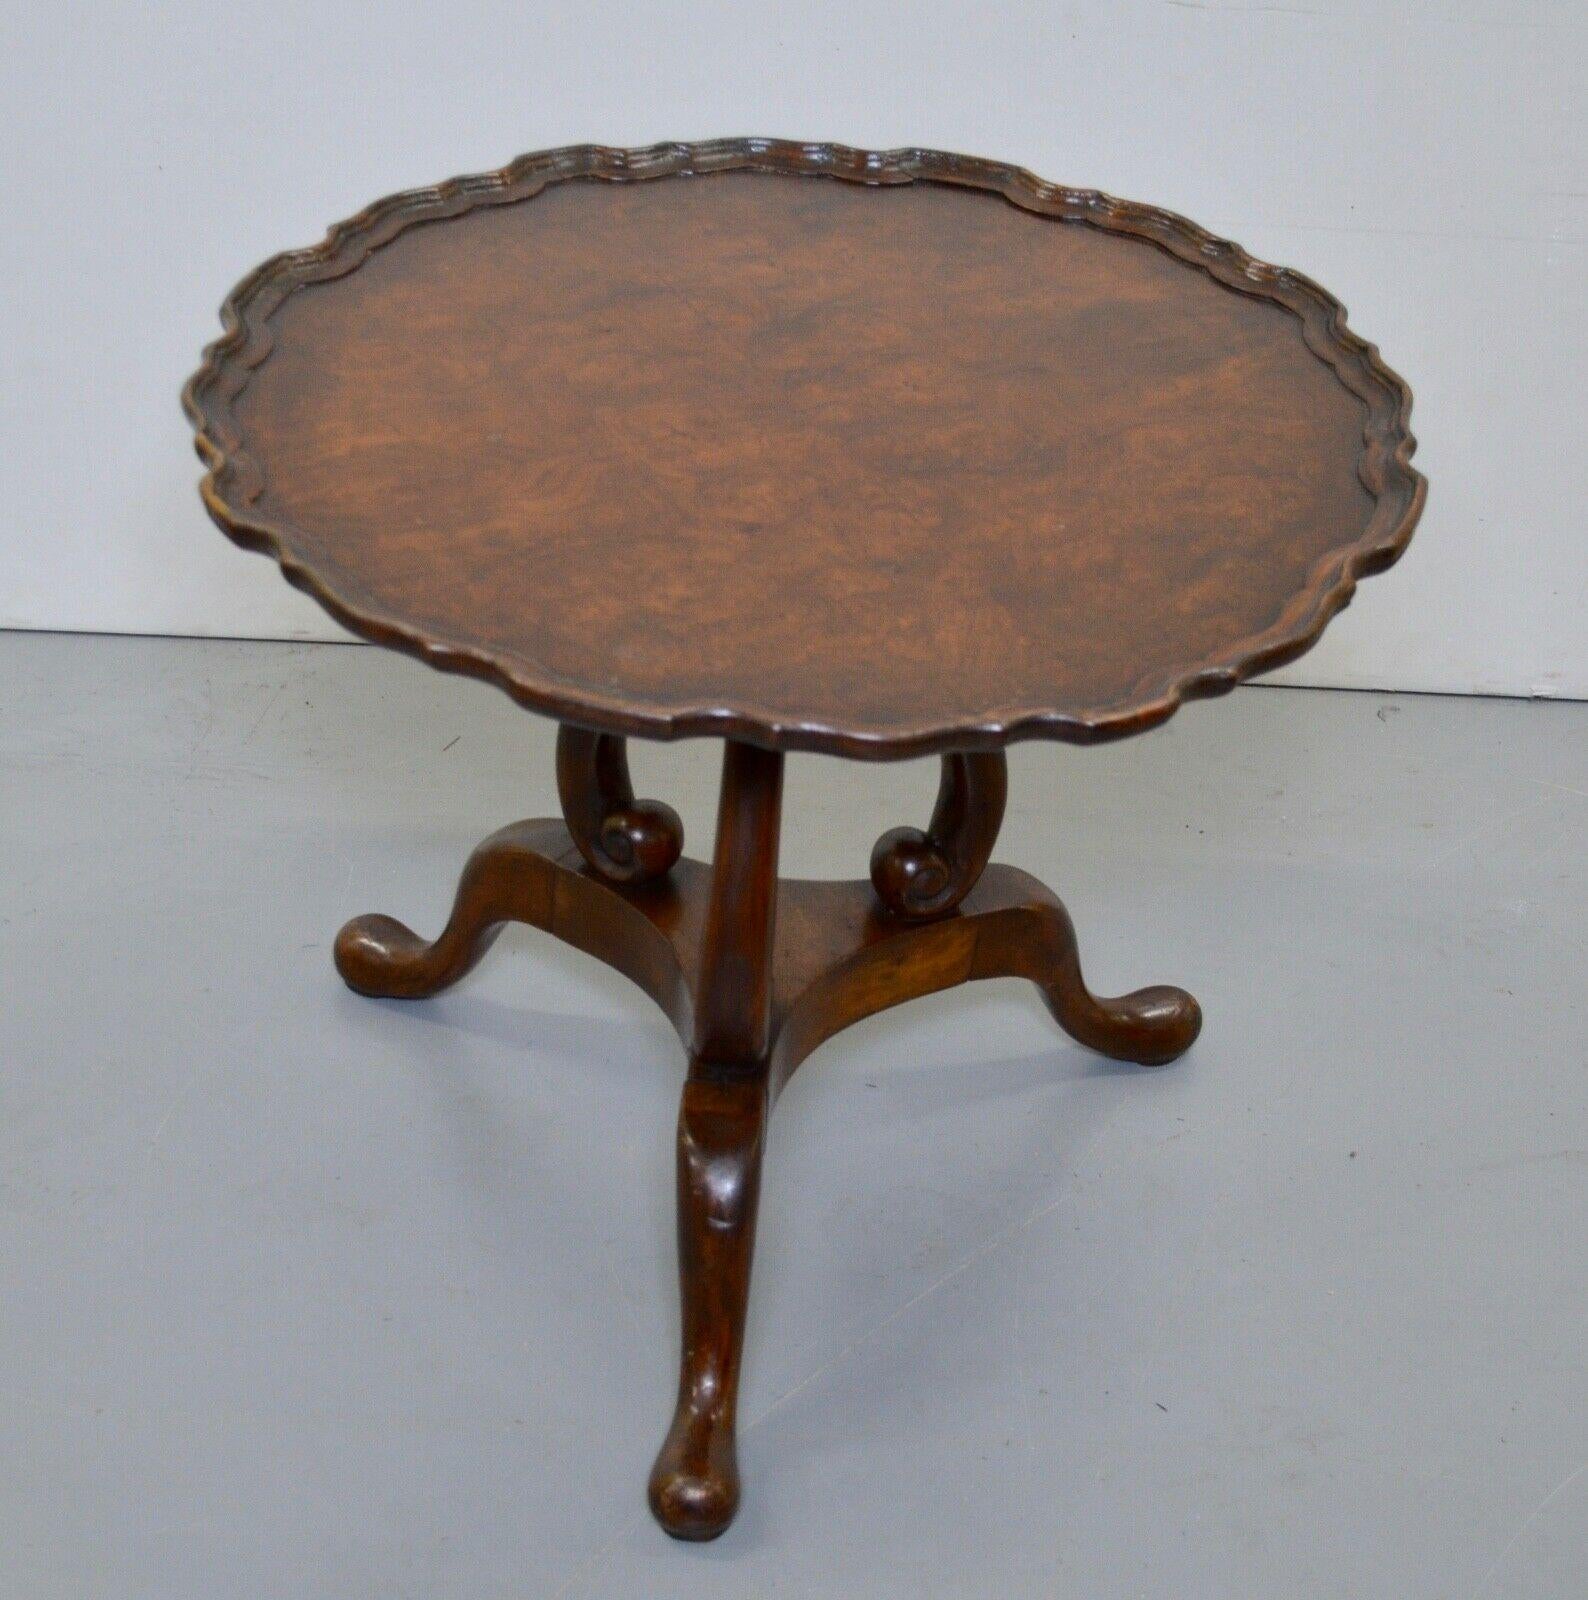 Hand-Crafted GEORGIAN REVIVIAL BURR-WALNUT OCCASiONAL COFFEE LAMP TABLE For Sale